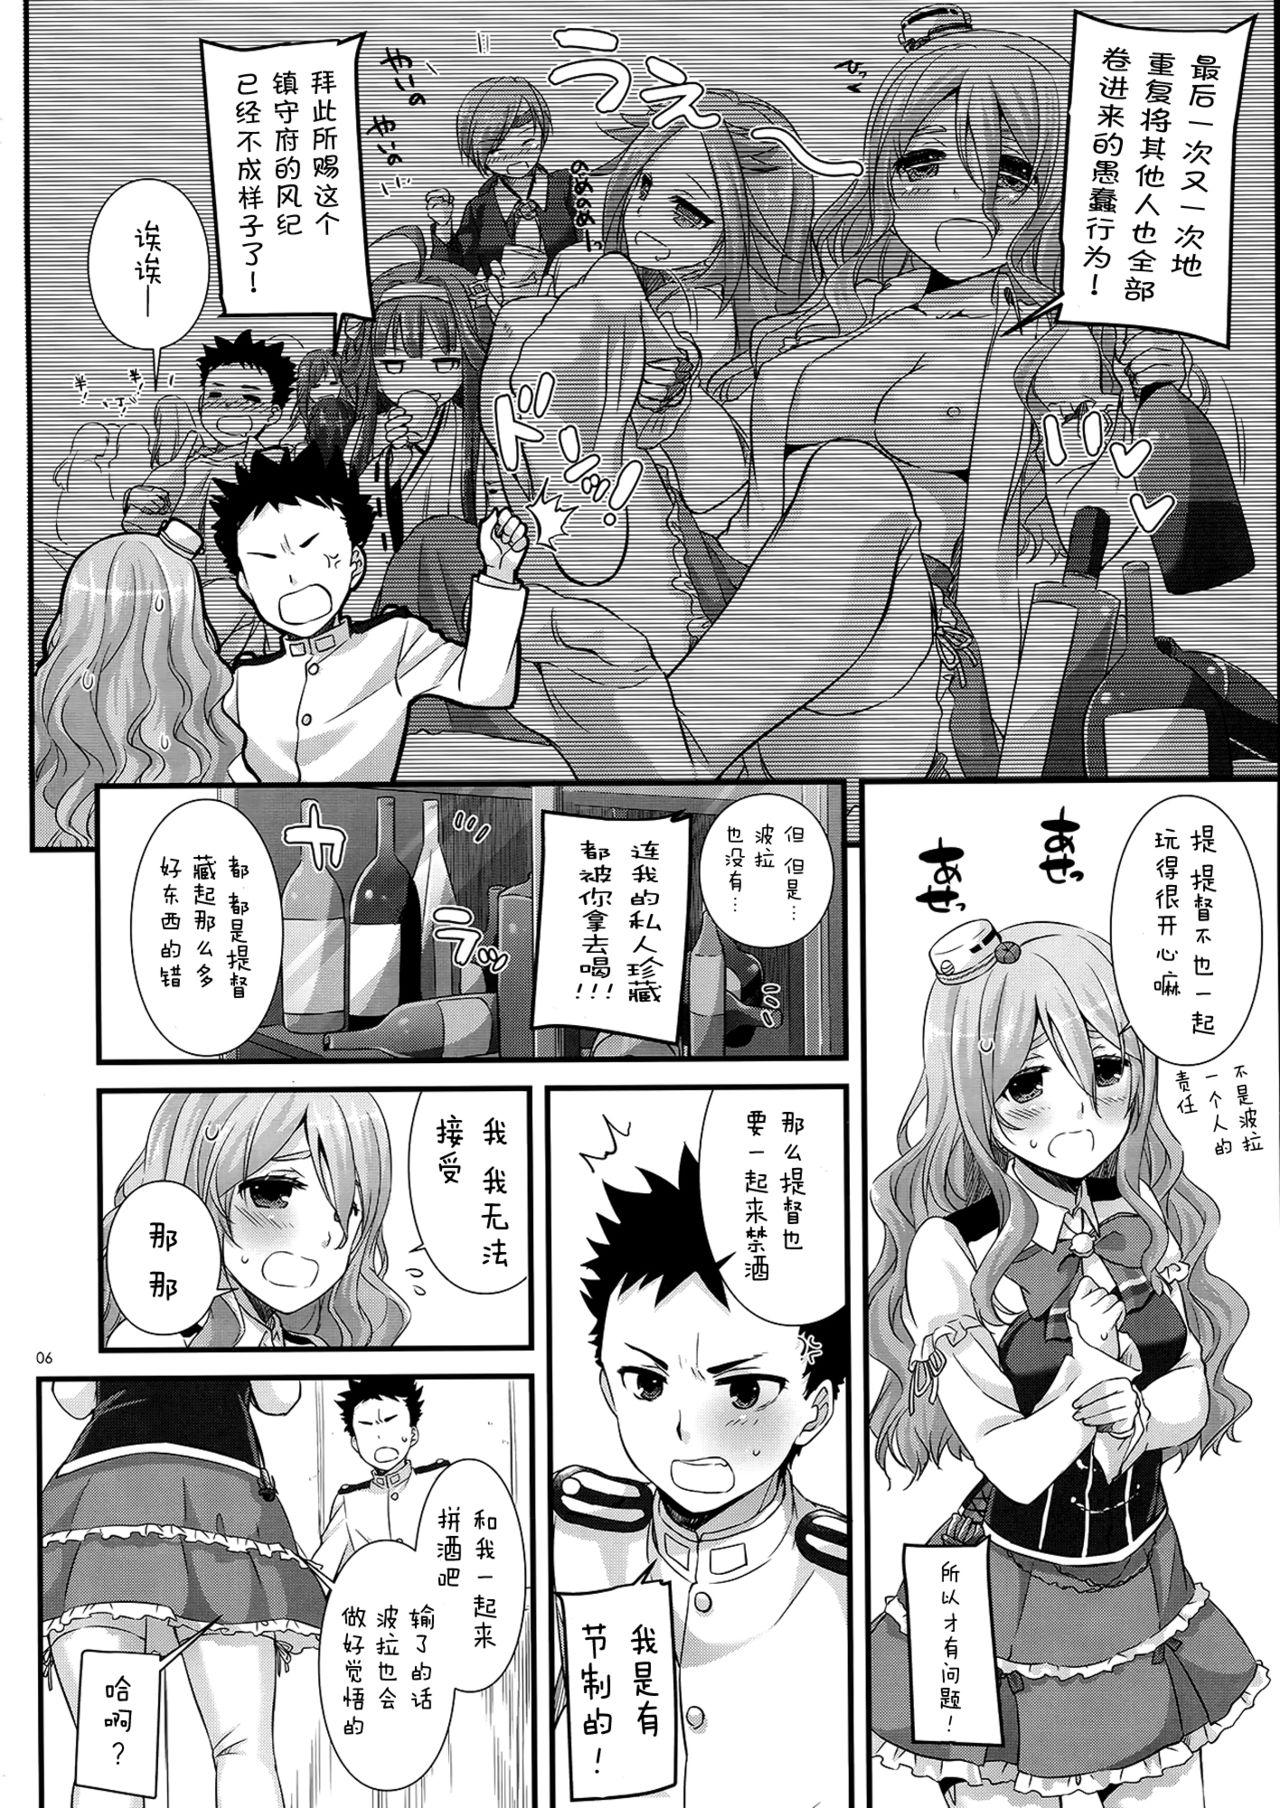 Anal Play D.L. action 107 - Kantai collection Fit - Page 4